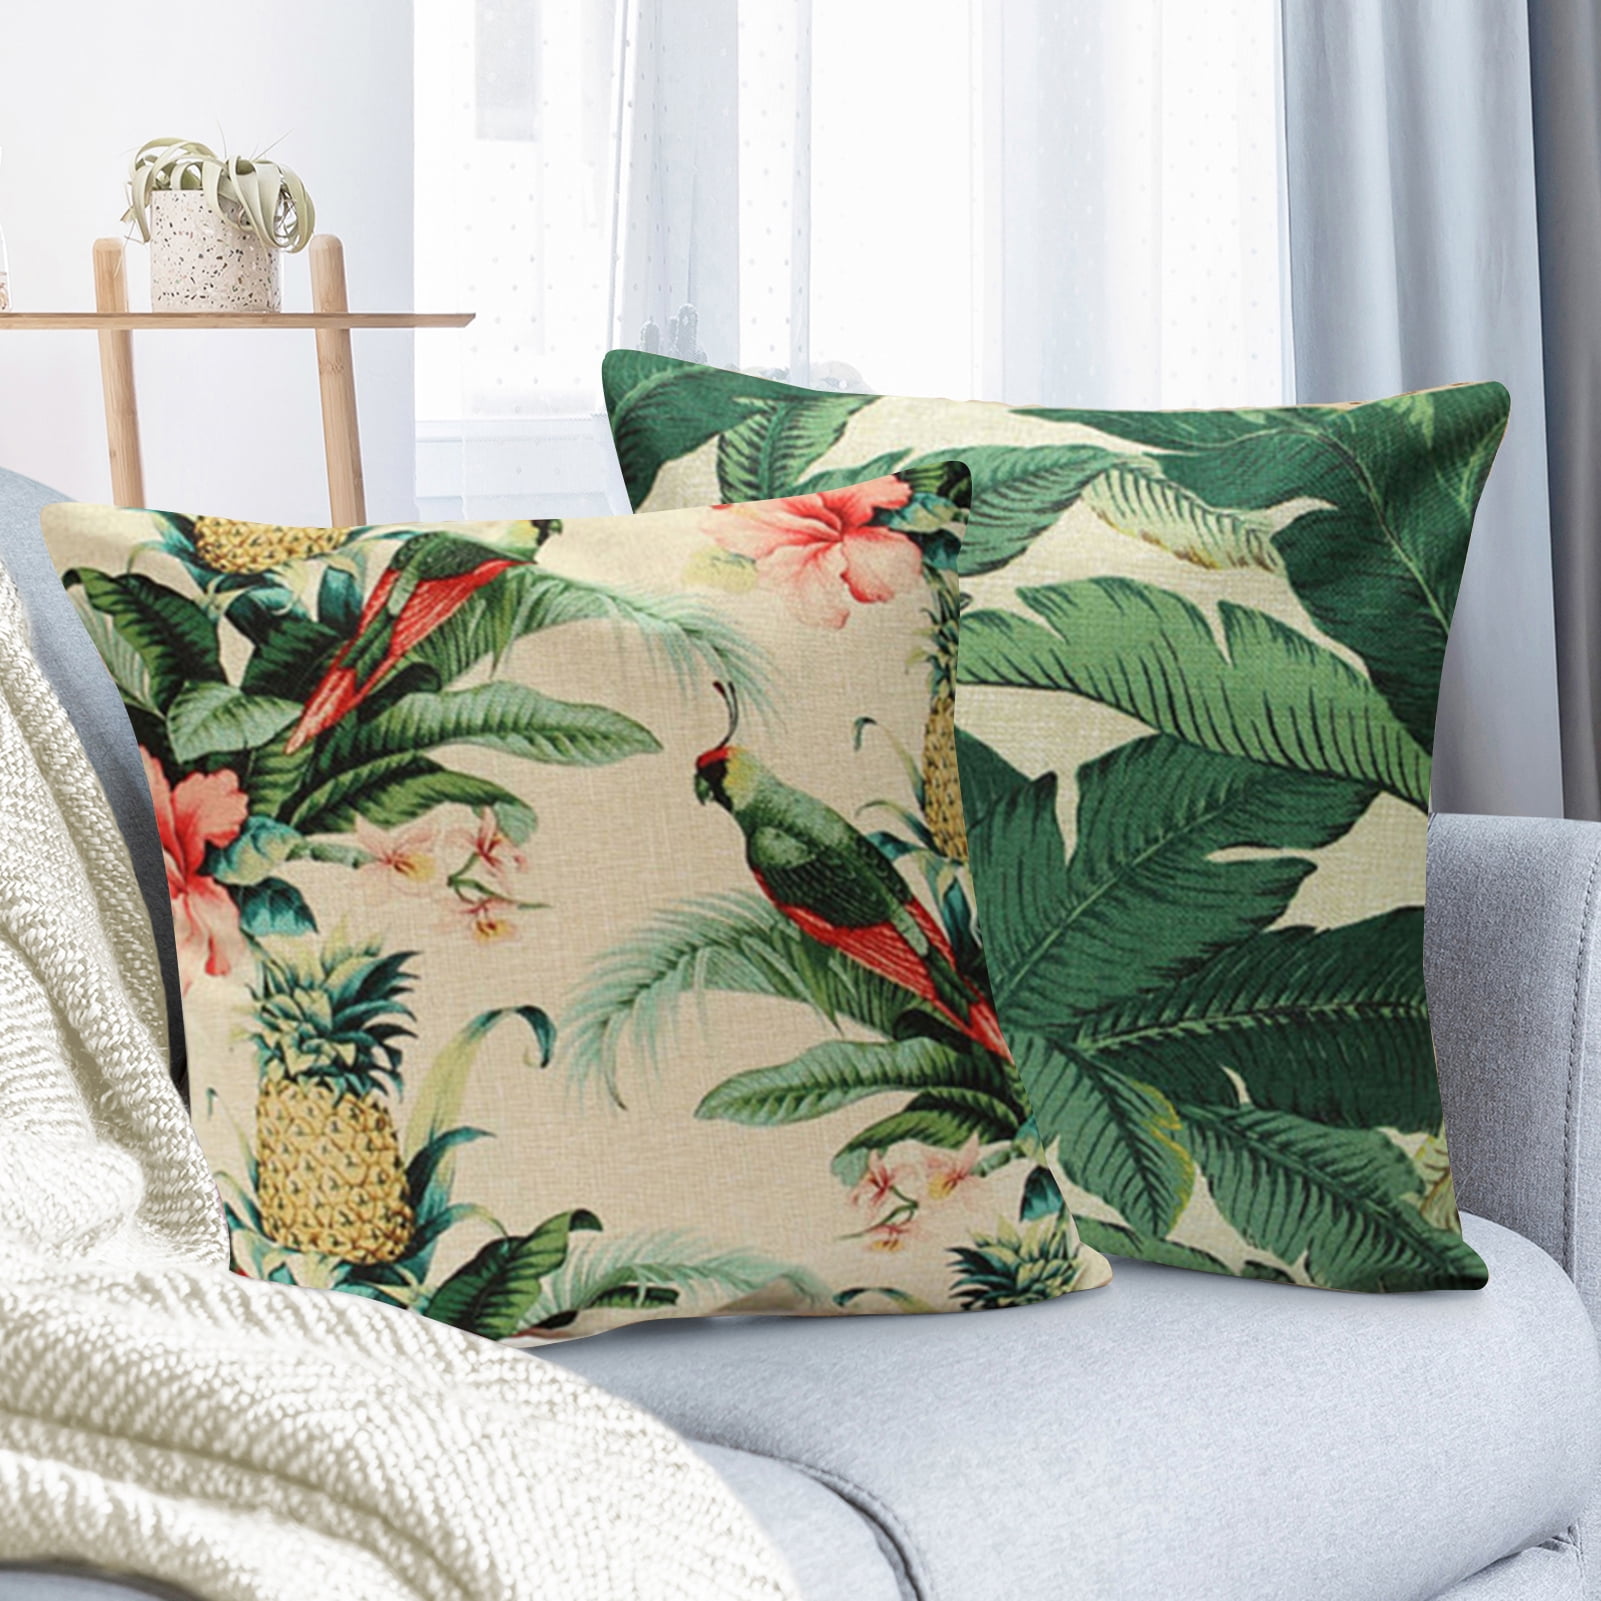 Tropical Green Leaf Home Decorative Throw Square Pillow Case Cover Cushion